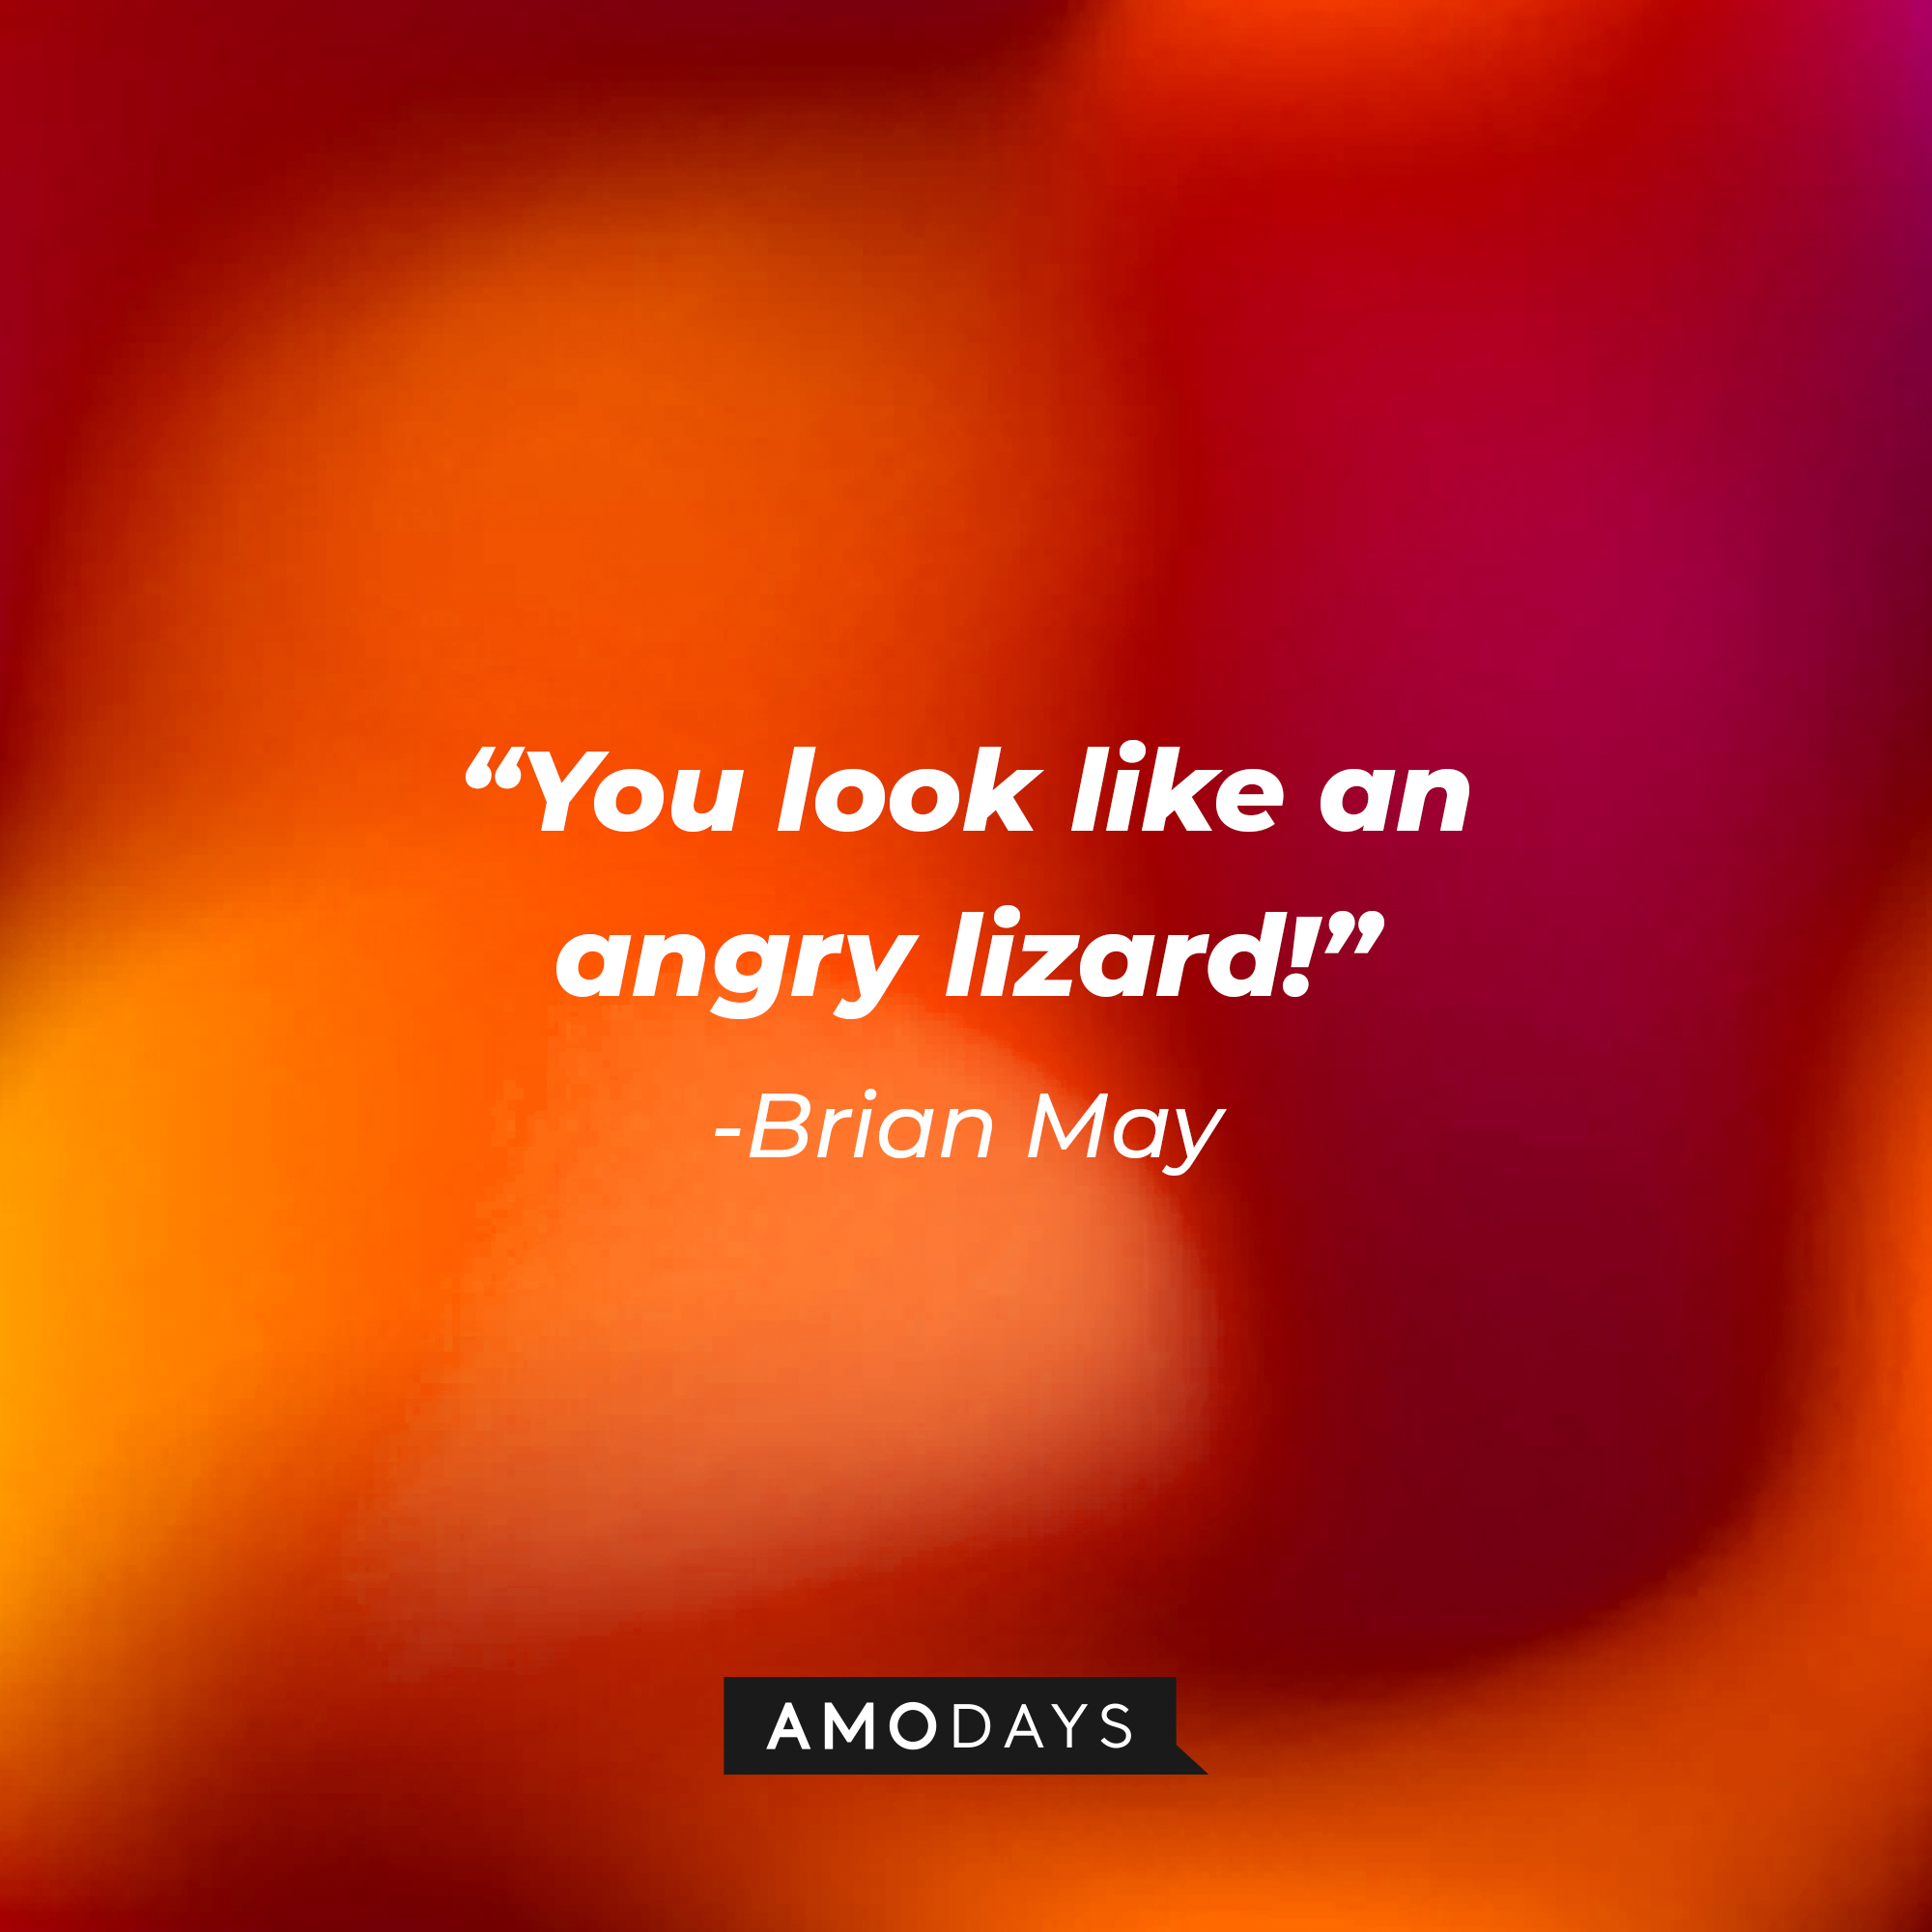 Brian May with his quote: "You look like an angry lizard." | Source: Amodays